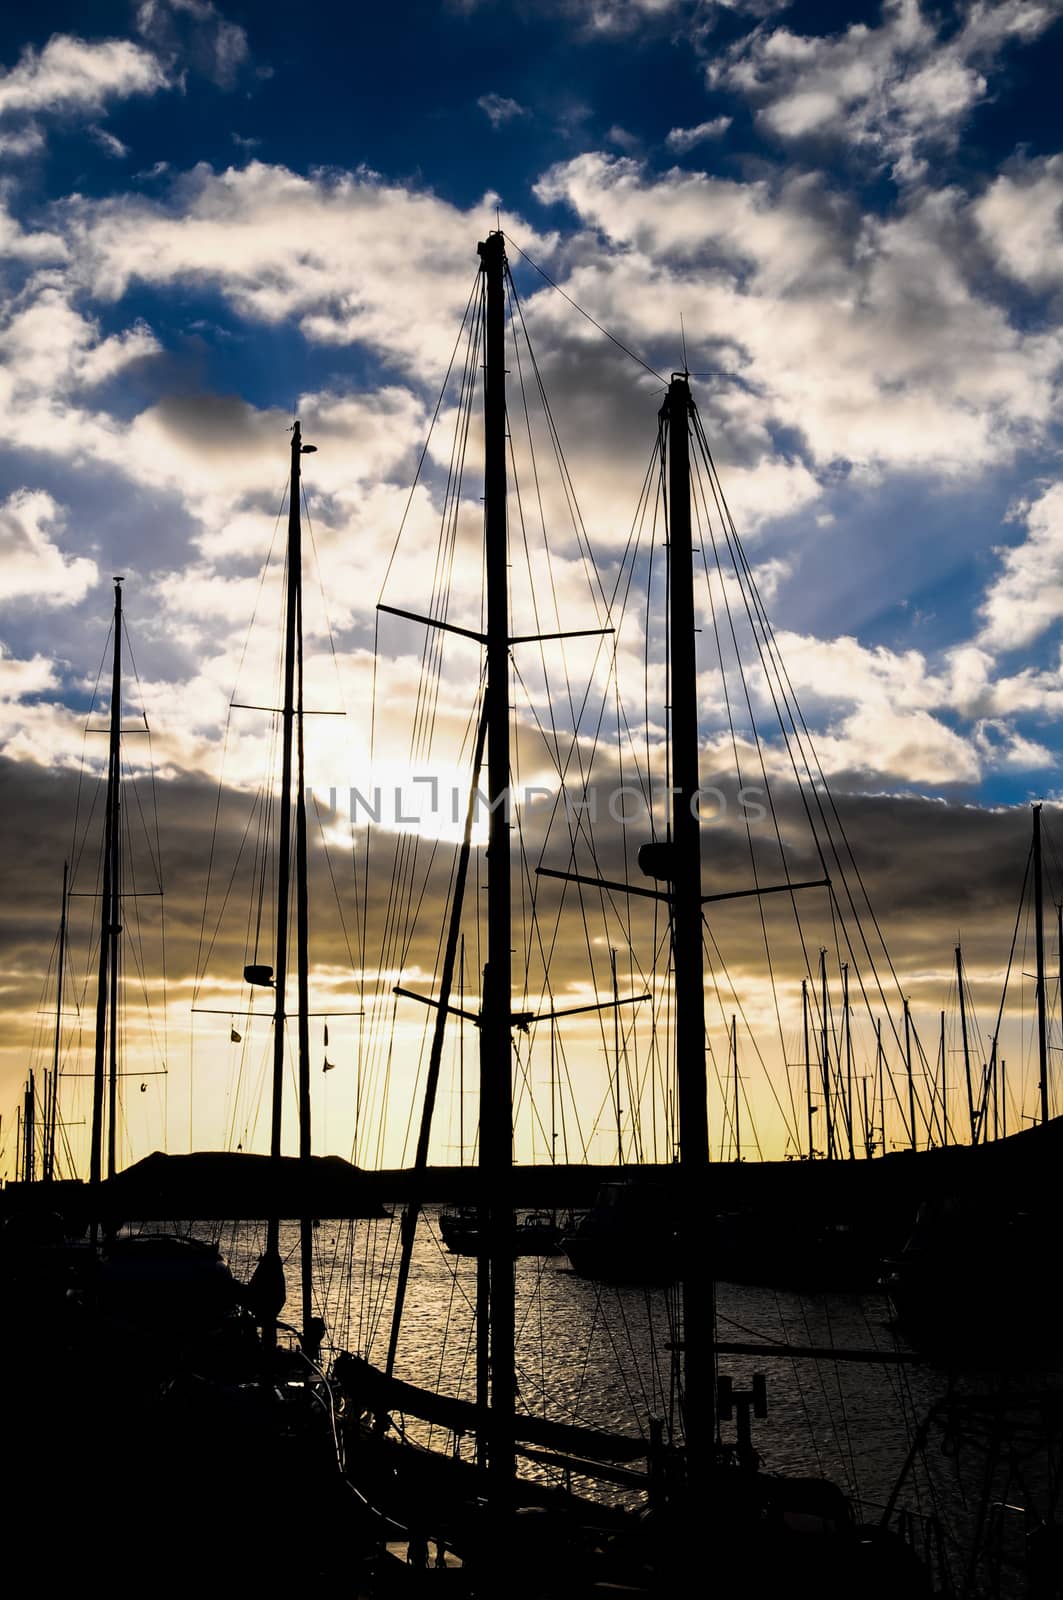 Silhouette Masts of Sail Yacht by underworld